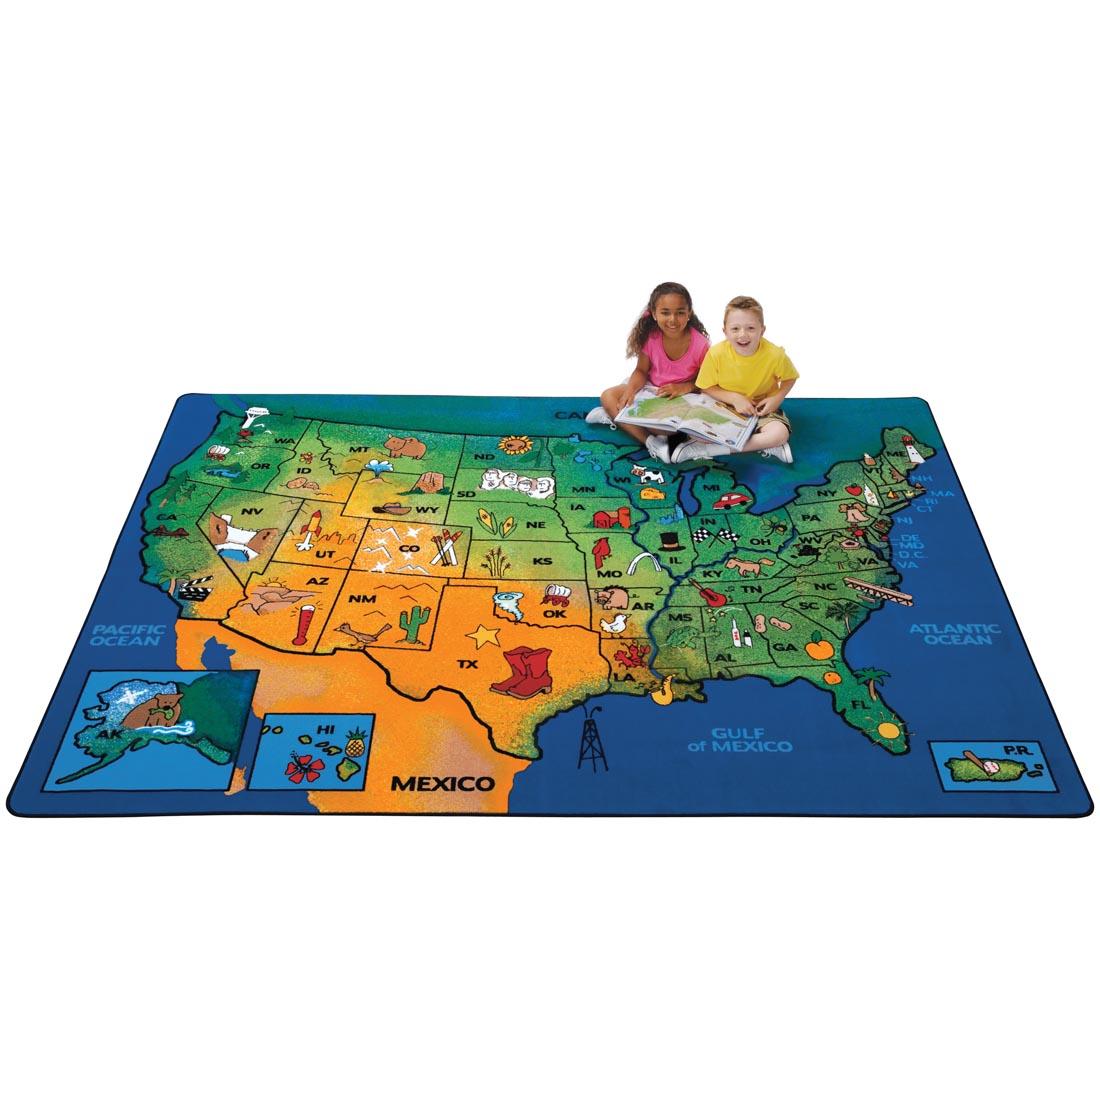 Children sitting with a book on the USA Learn & Play Rug by Carpets For Kids